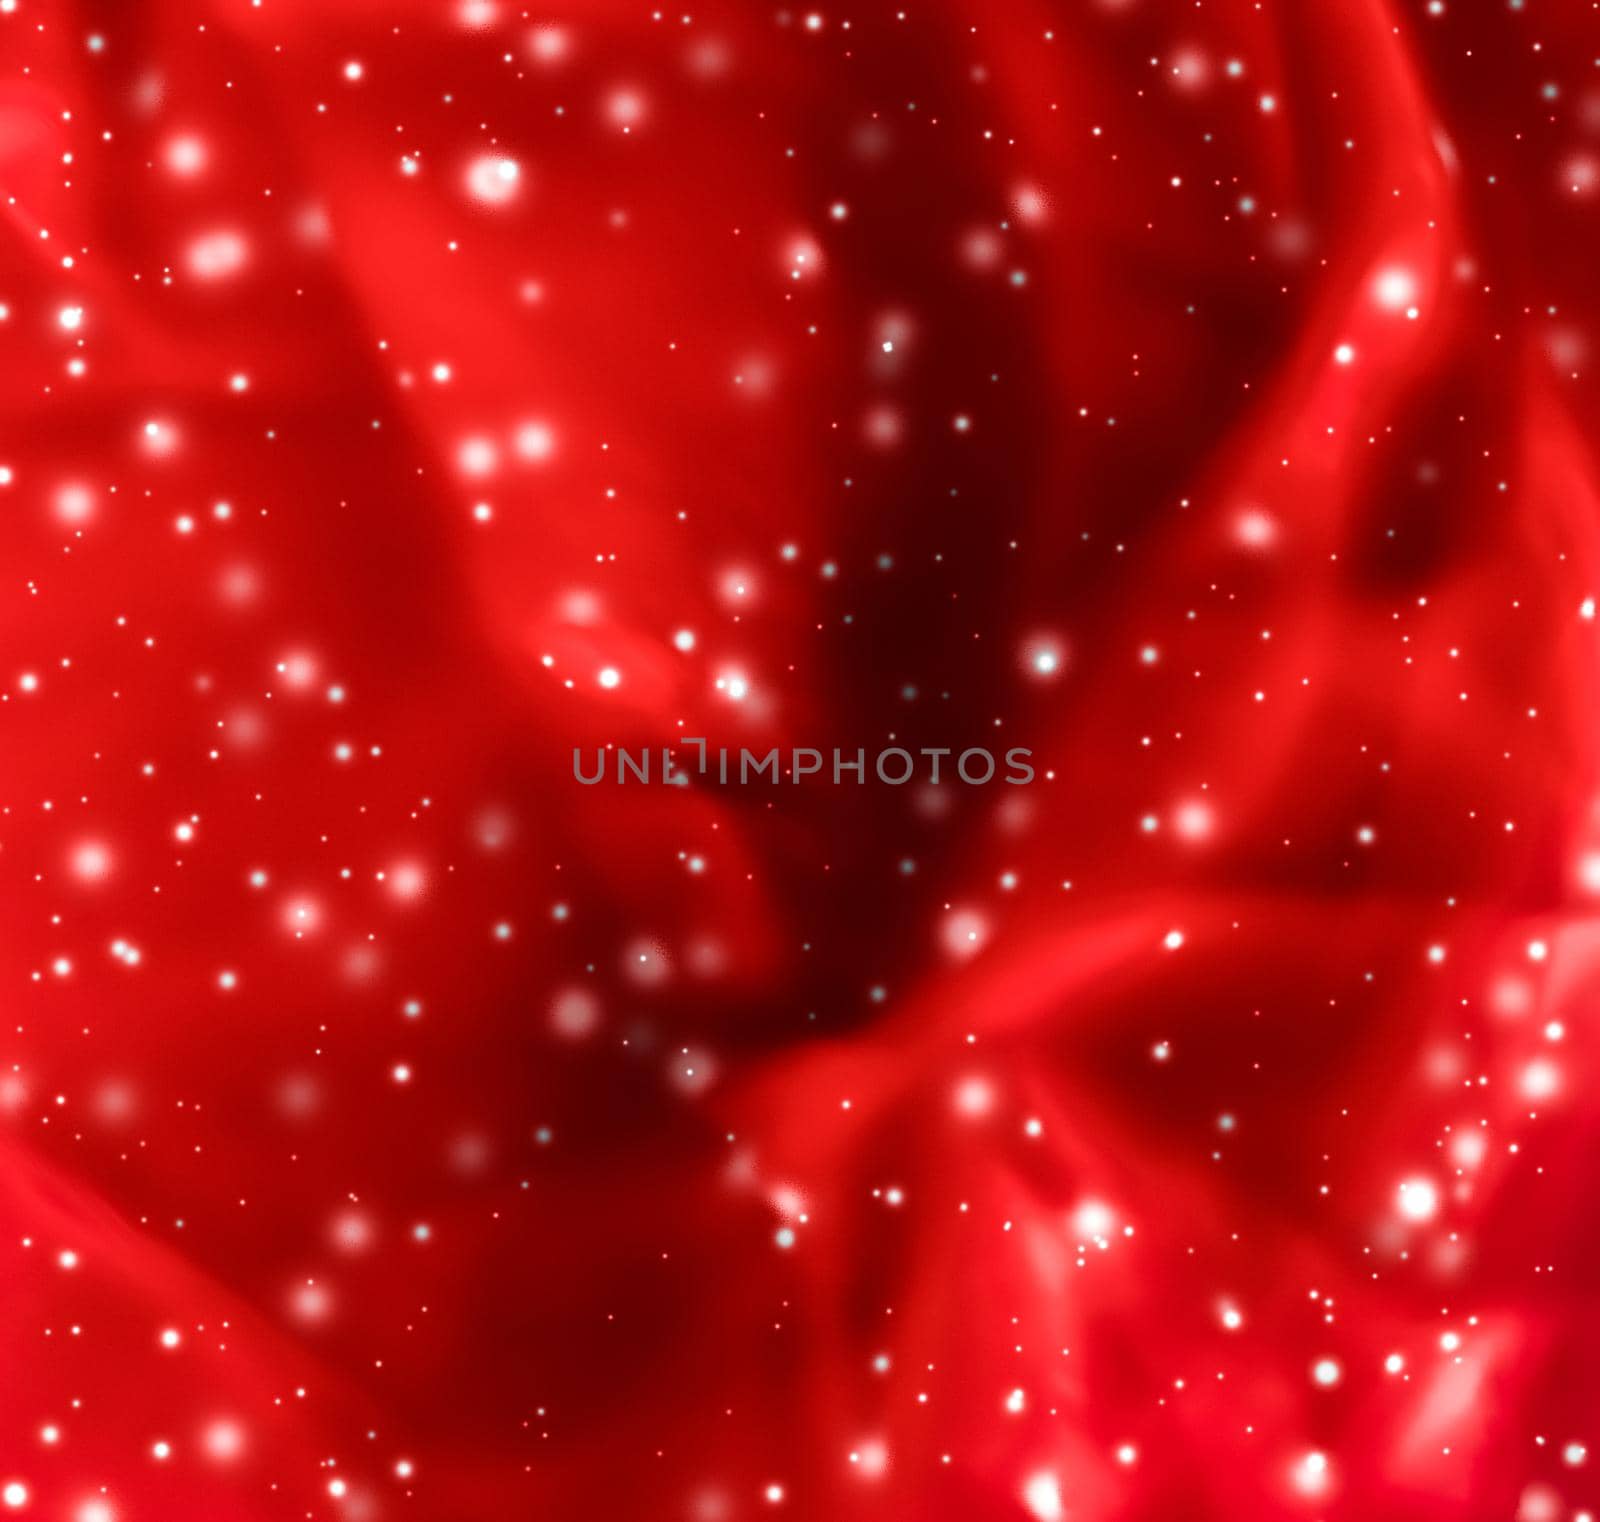 Branding, magic and festive concept - Christmas, New Years and Valentines Day red abstract background, holidays card design, shiny snow glitter as winter season sale backdrop for luxury beauty brand